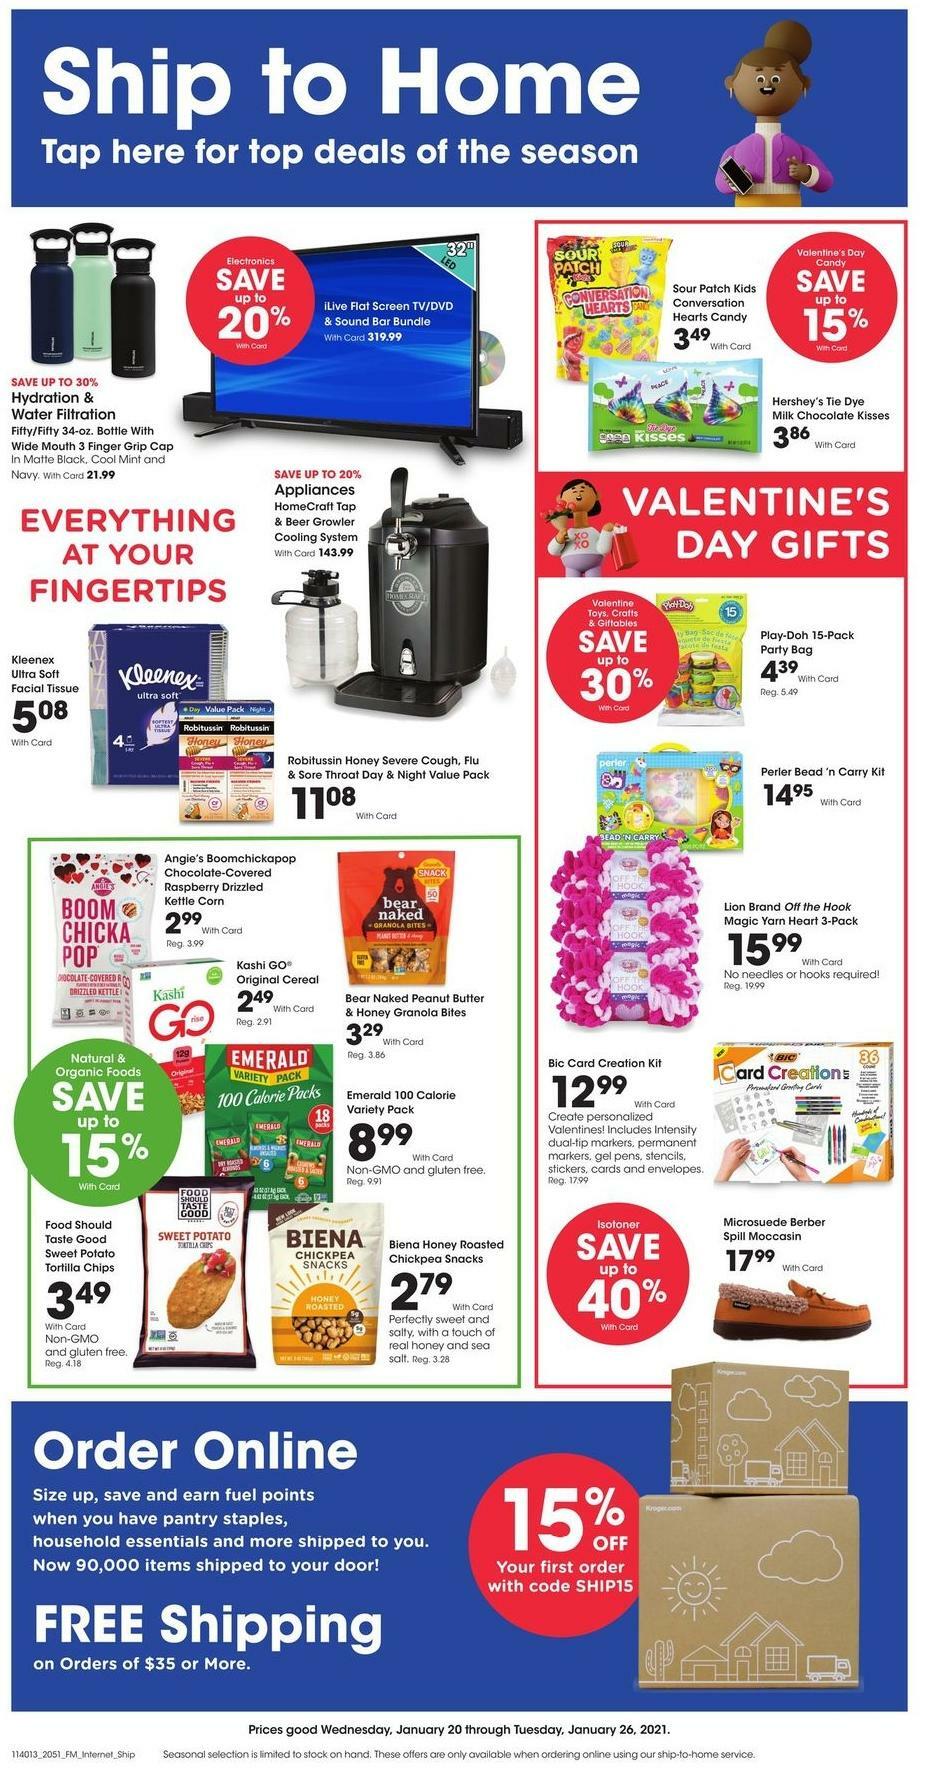 City Market Ship to Home Weekly Ad from January 20